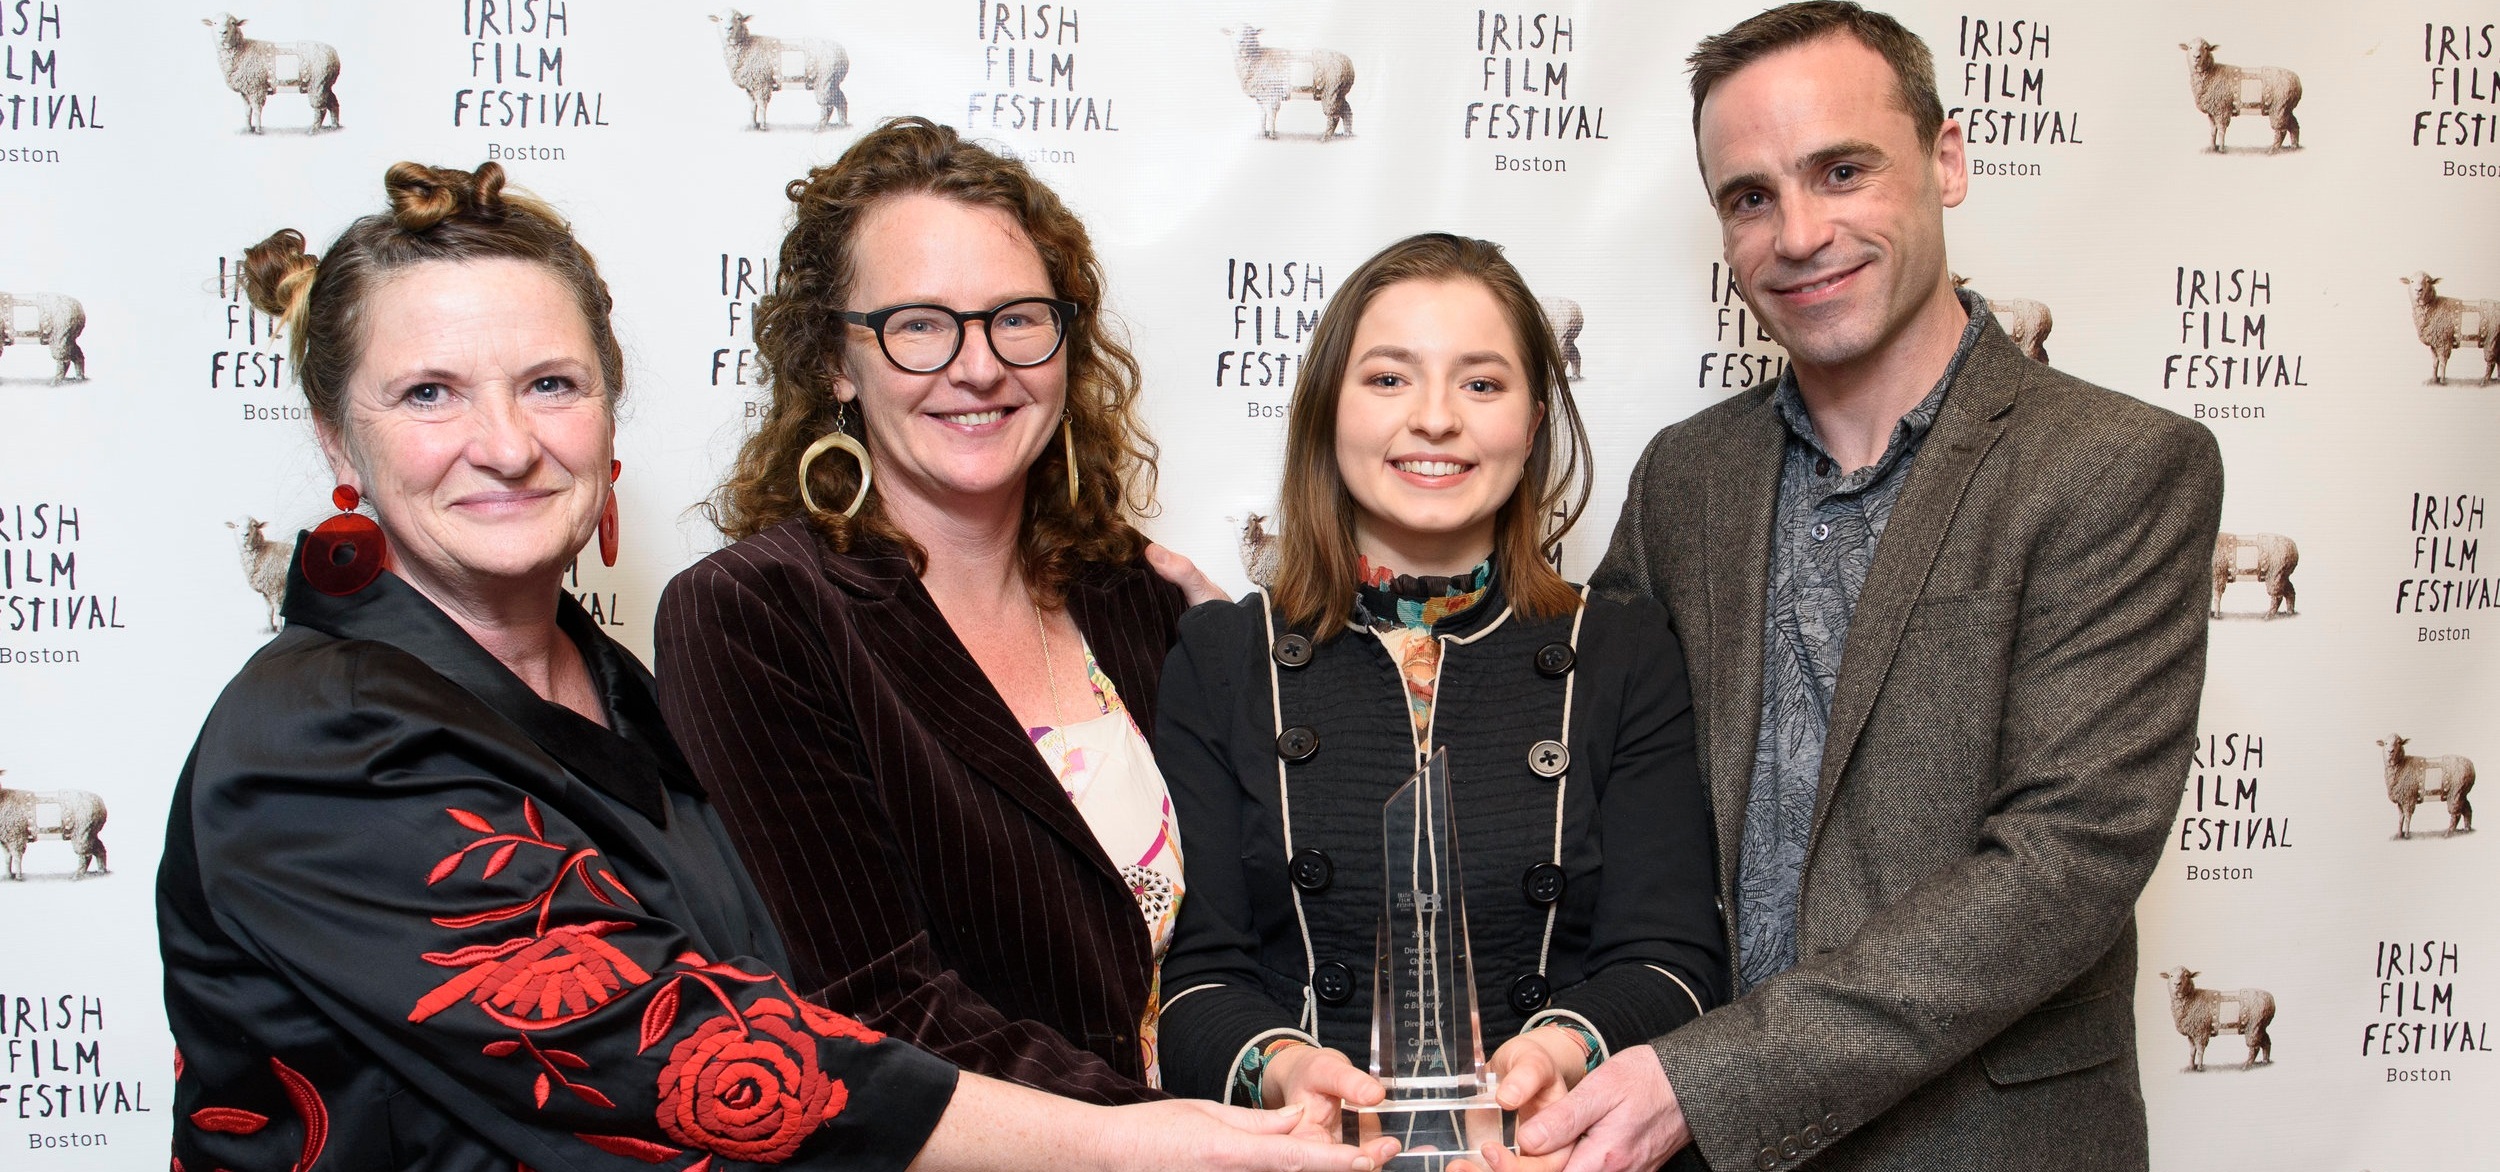  FLOAT LIKE A BUTTERFLY, winner of our 2019 Director’s Choice Feature.  Left to right: Production Designer Toma McCullim, Director Carmel Winters, Actor Hazel Doupe and Actor Dara Devaney 